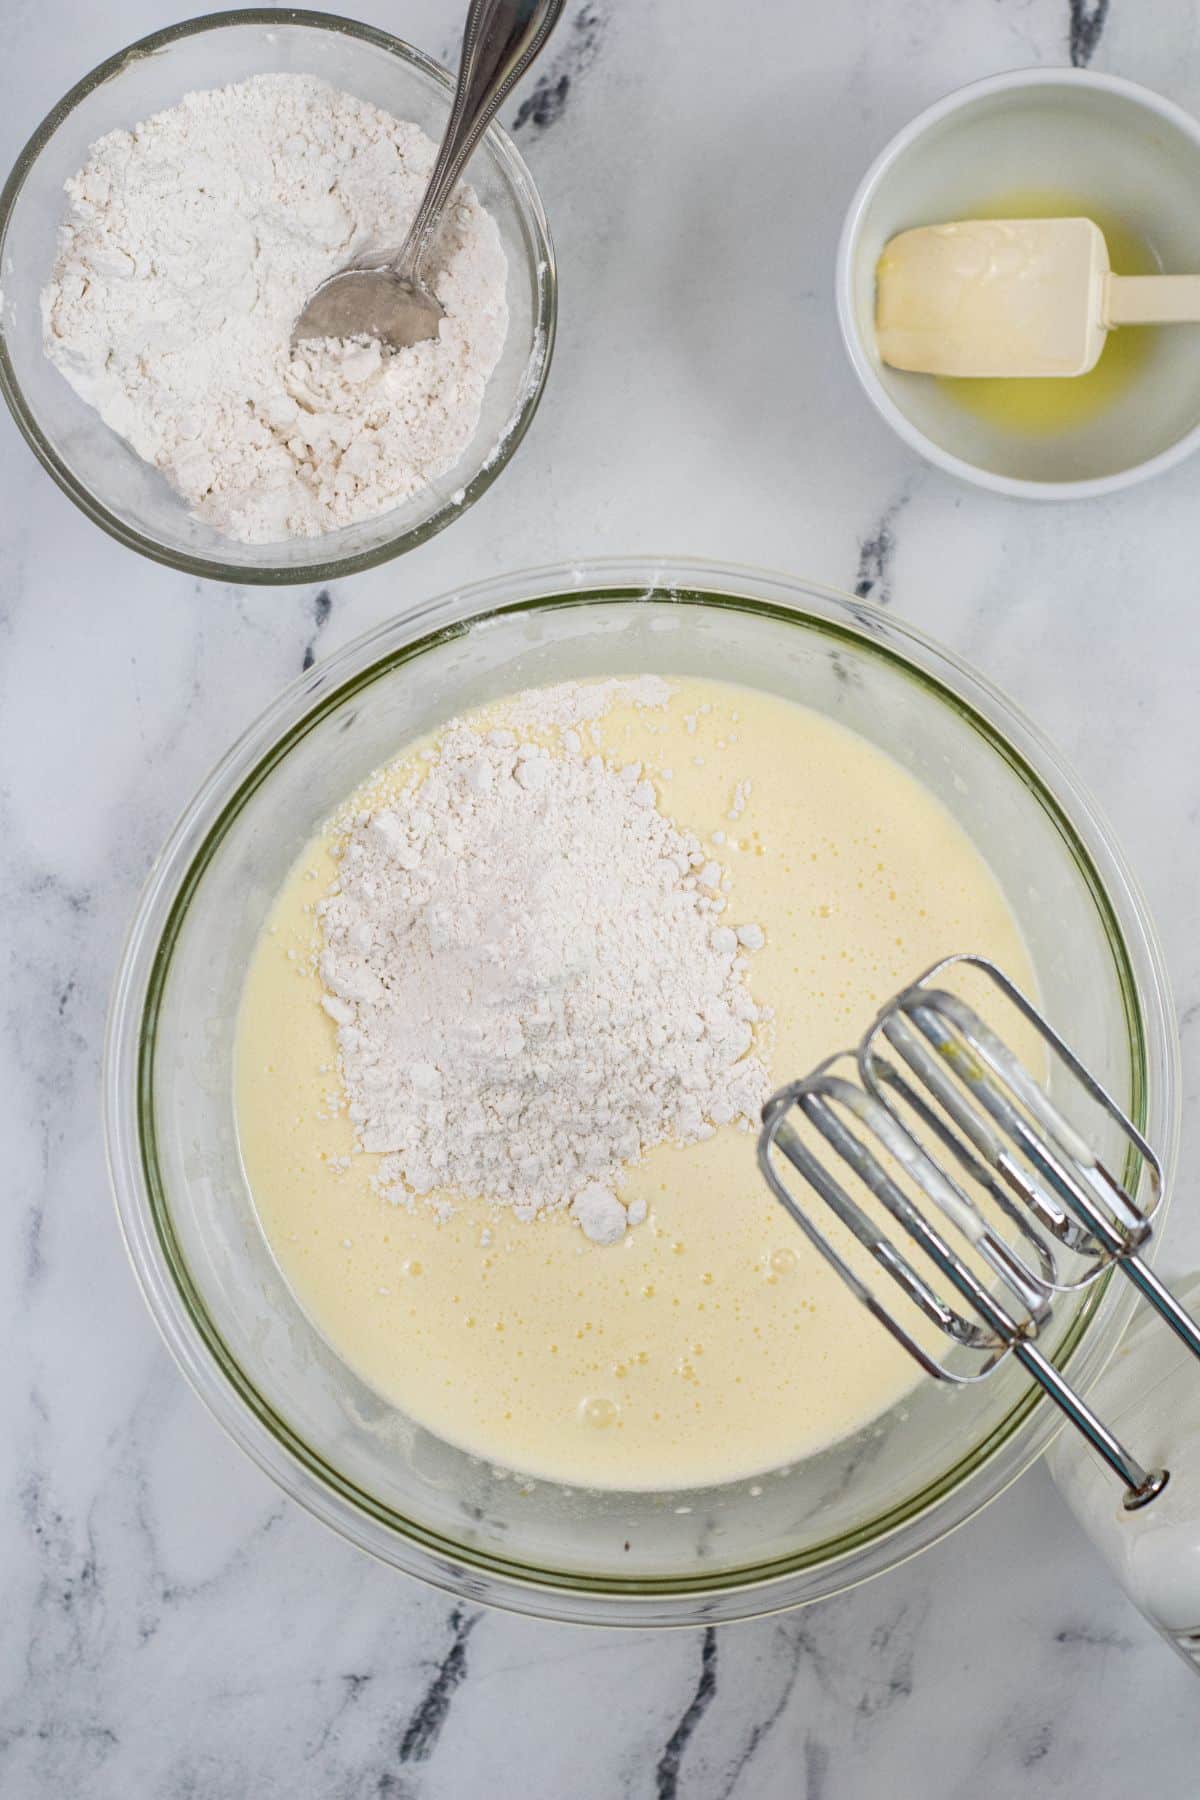 Flour and wet ingredients with hand mixer in a glass bowl